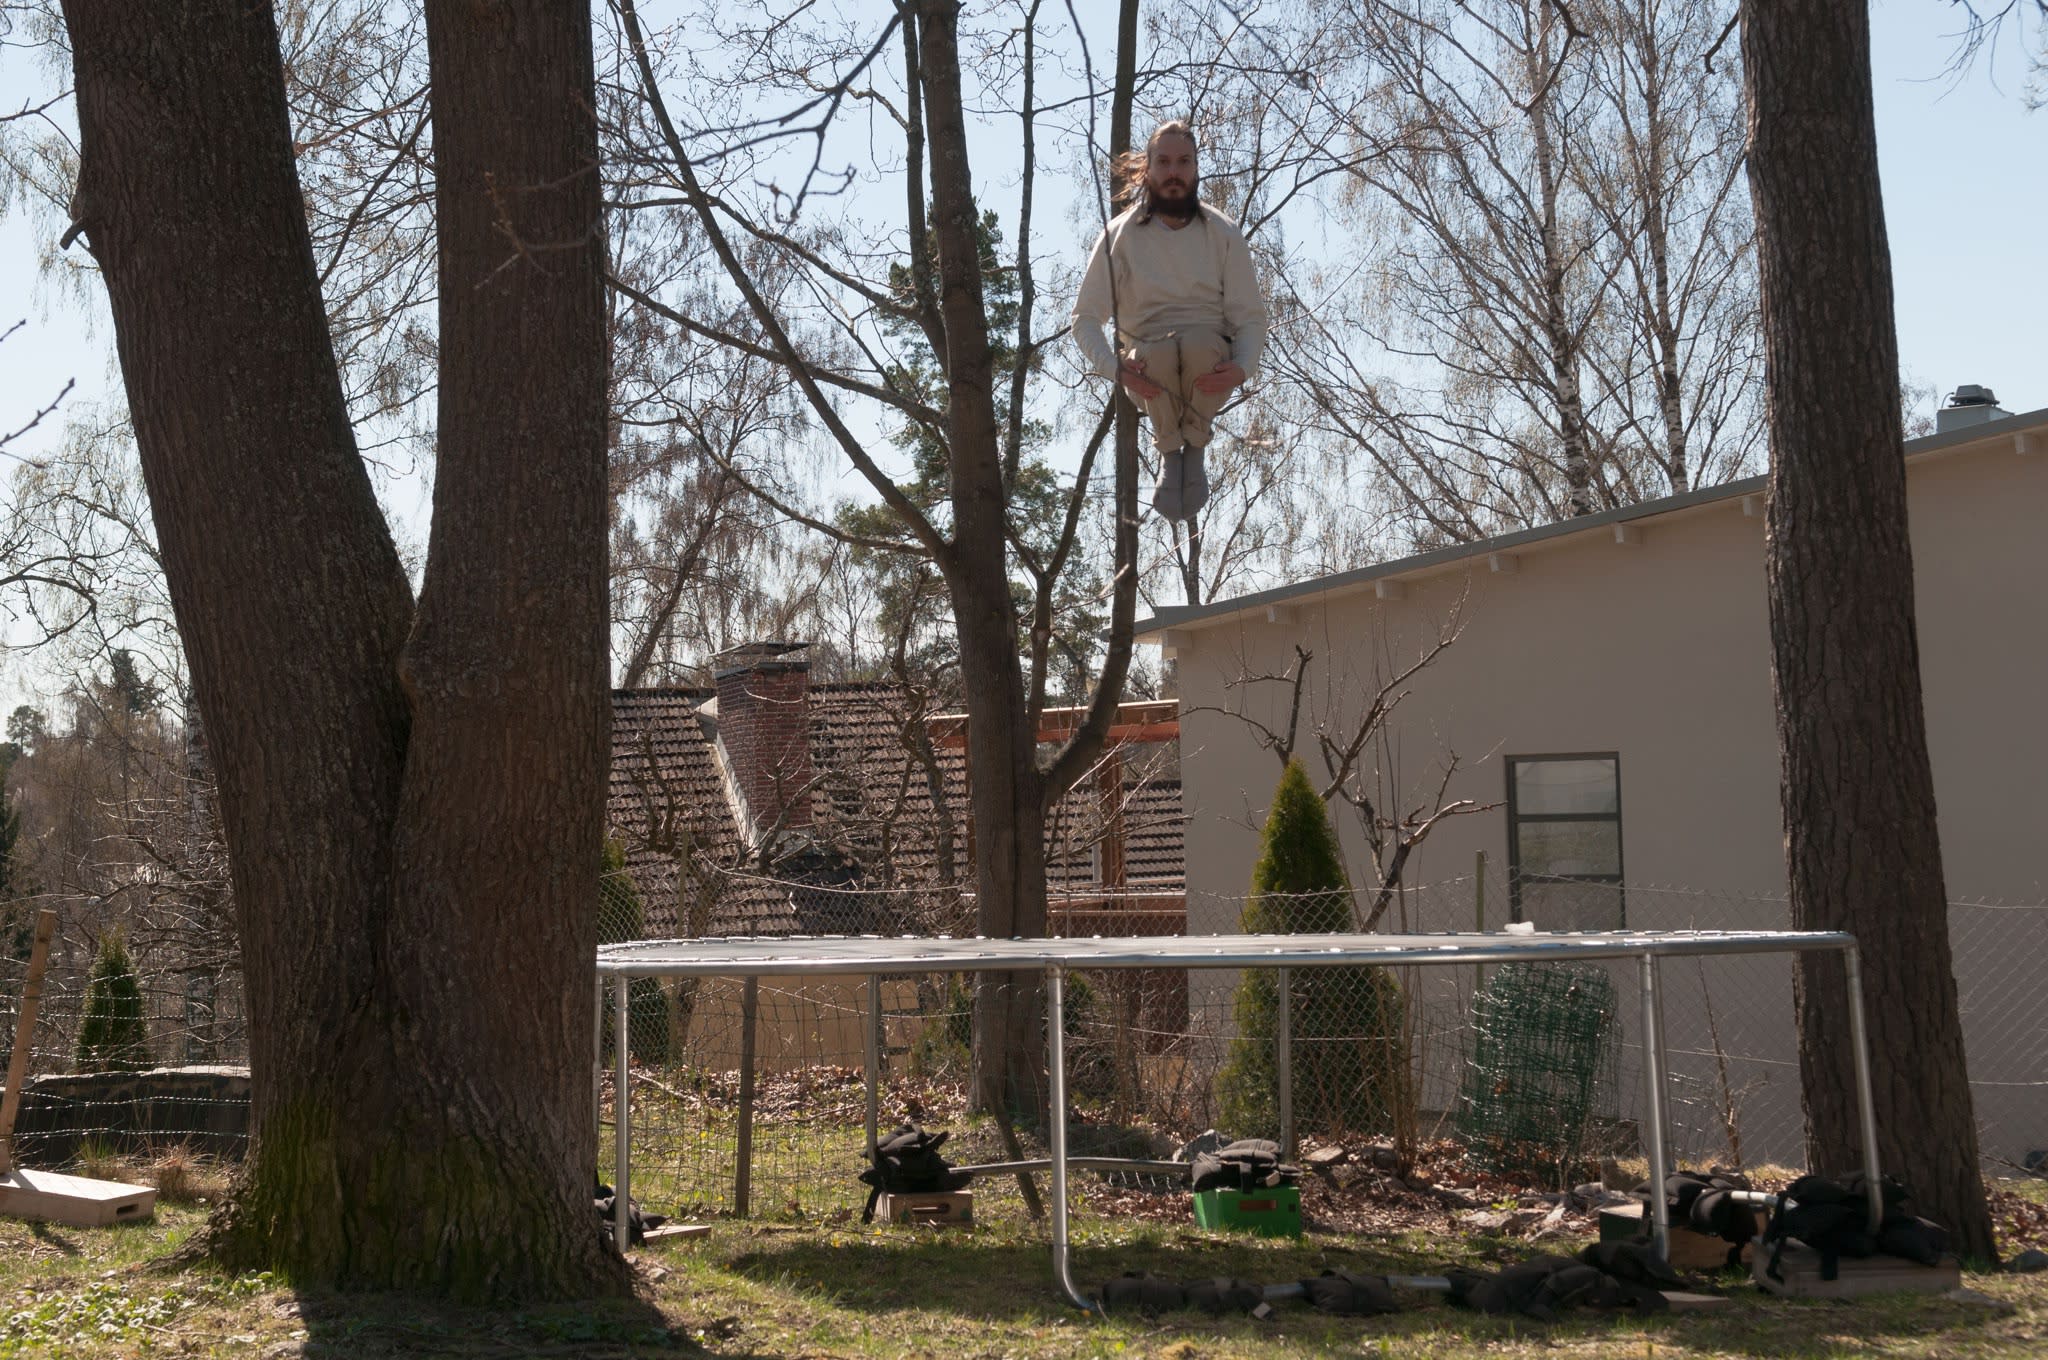 Image of person curled in a ball mid-air from jumping on trampoline in suburban backyard.